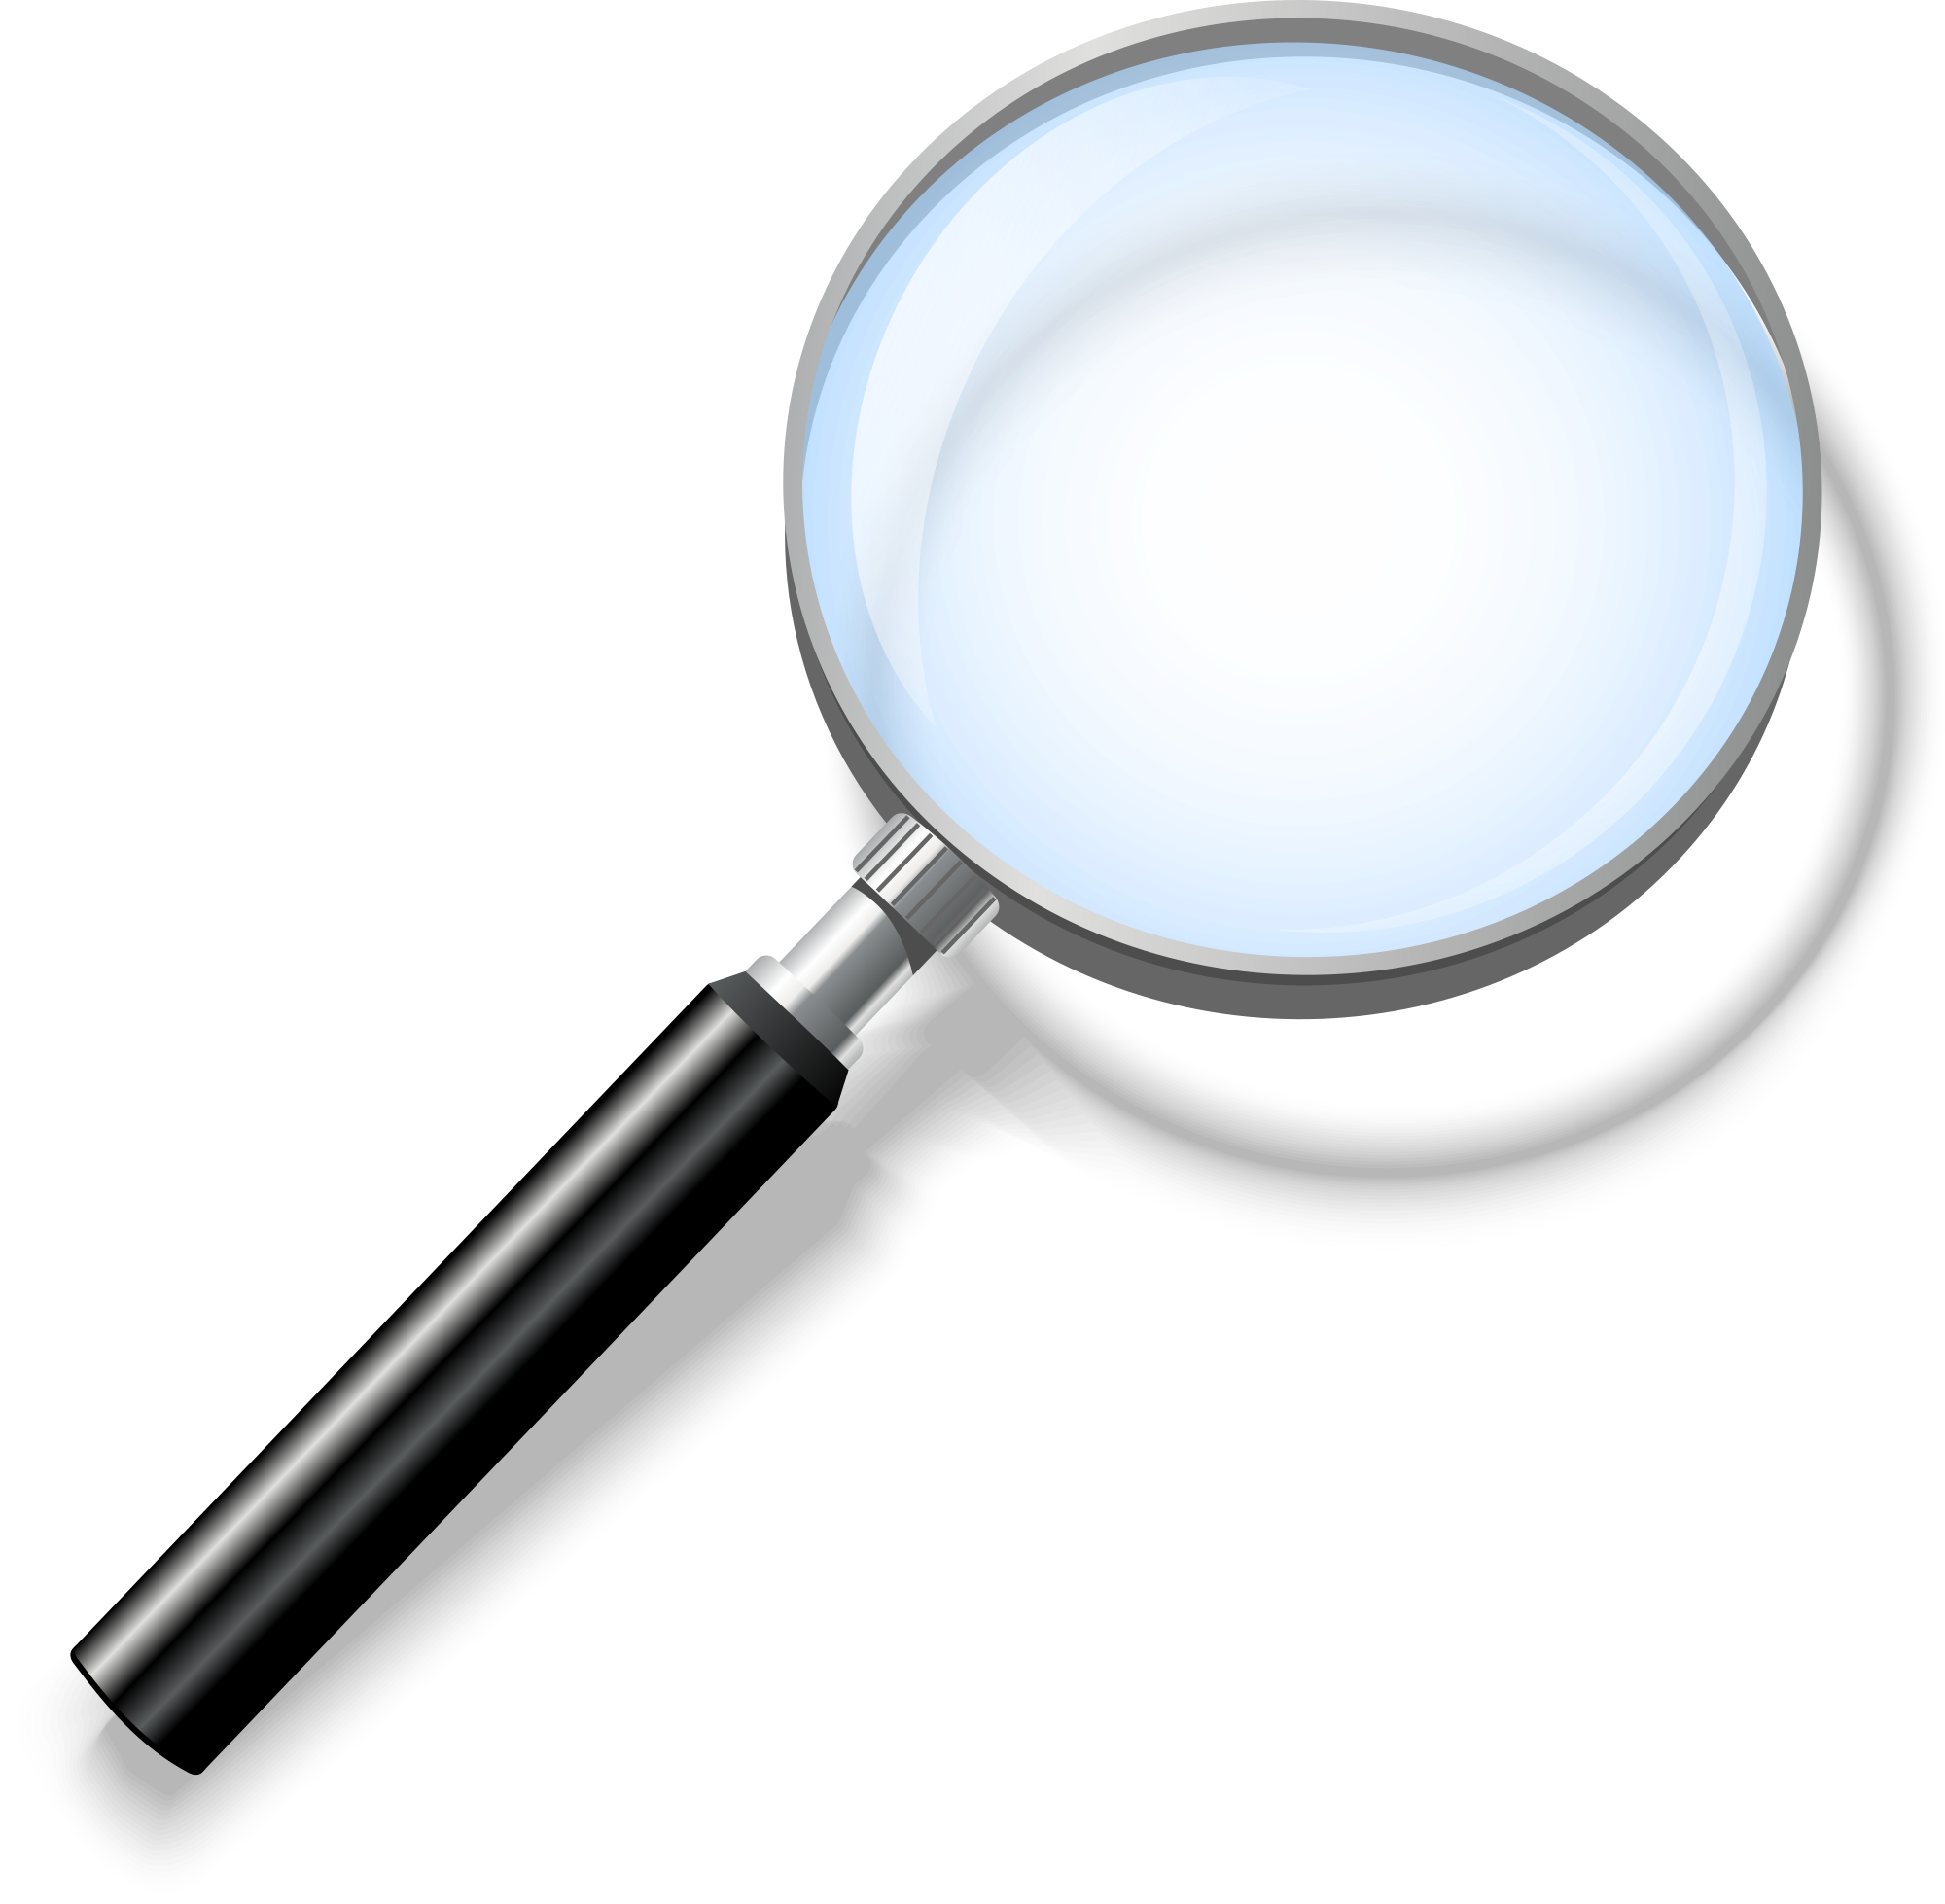 File:Magnifying glass icon mgx2.svg - Wikimedia Commons